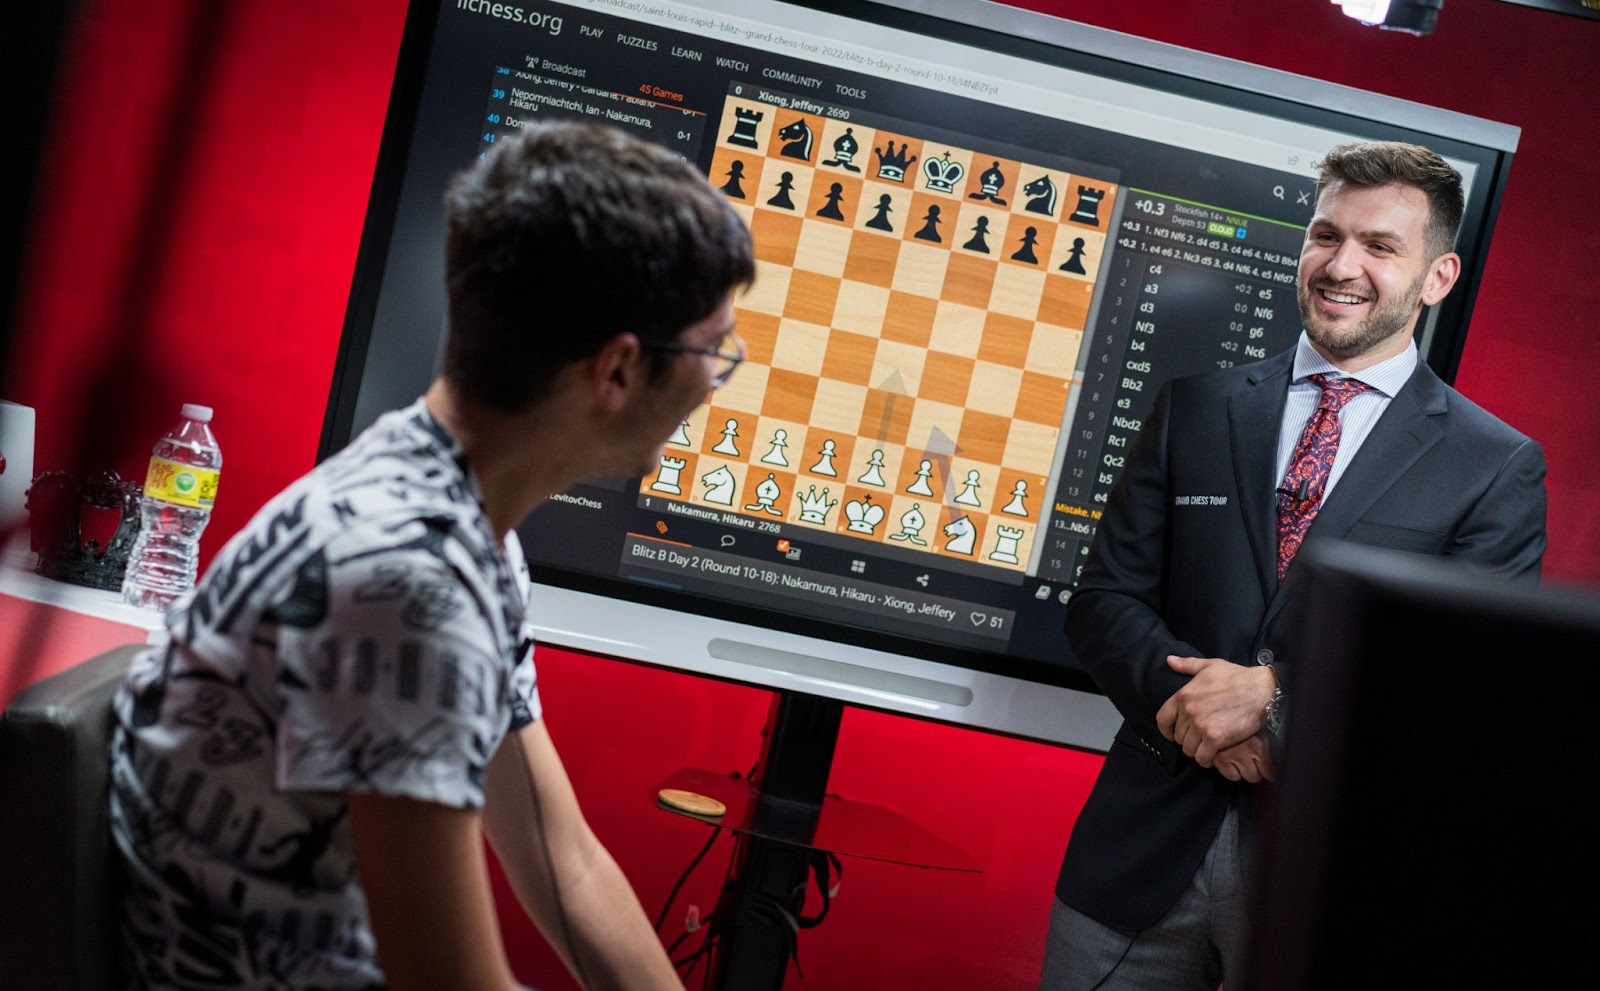 Nakamura is world no.1 in Rapid and Blitz